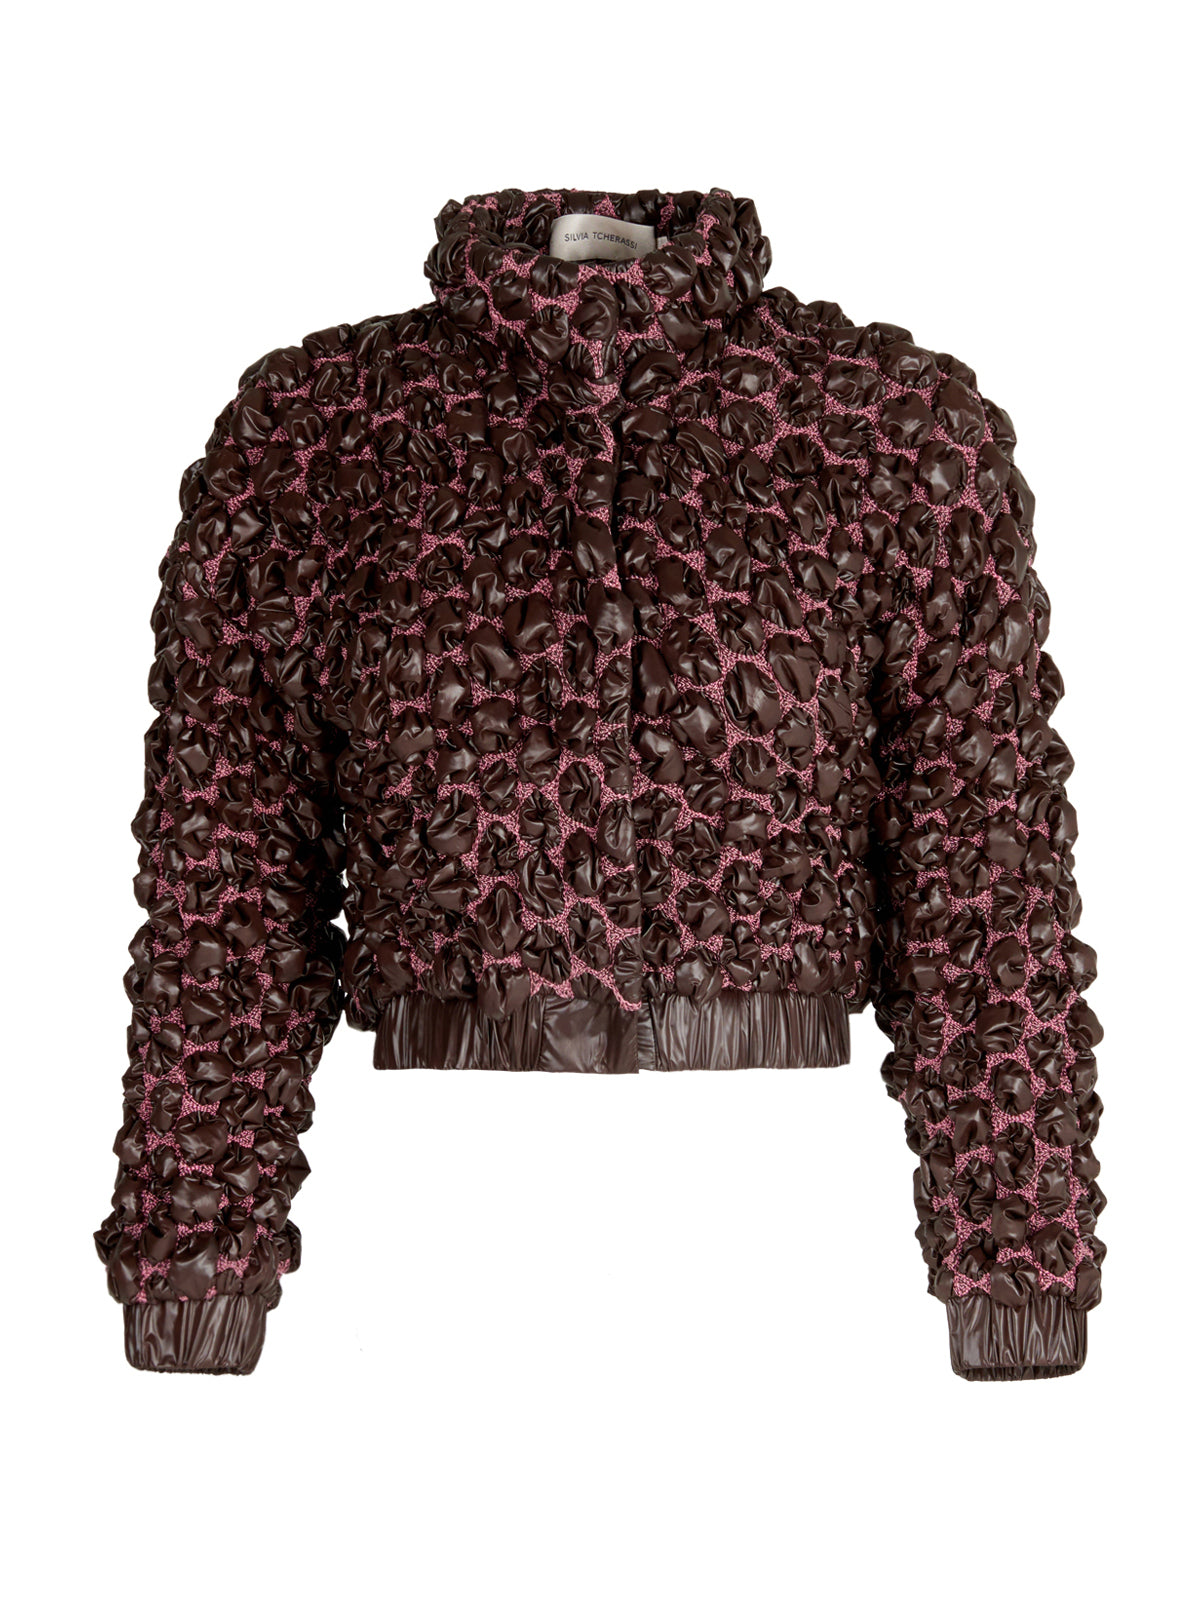 This brown and pink Zalta Jacket Brown features ruffles, perfect for adding a feminine touch to any outfit.